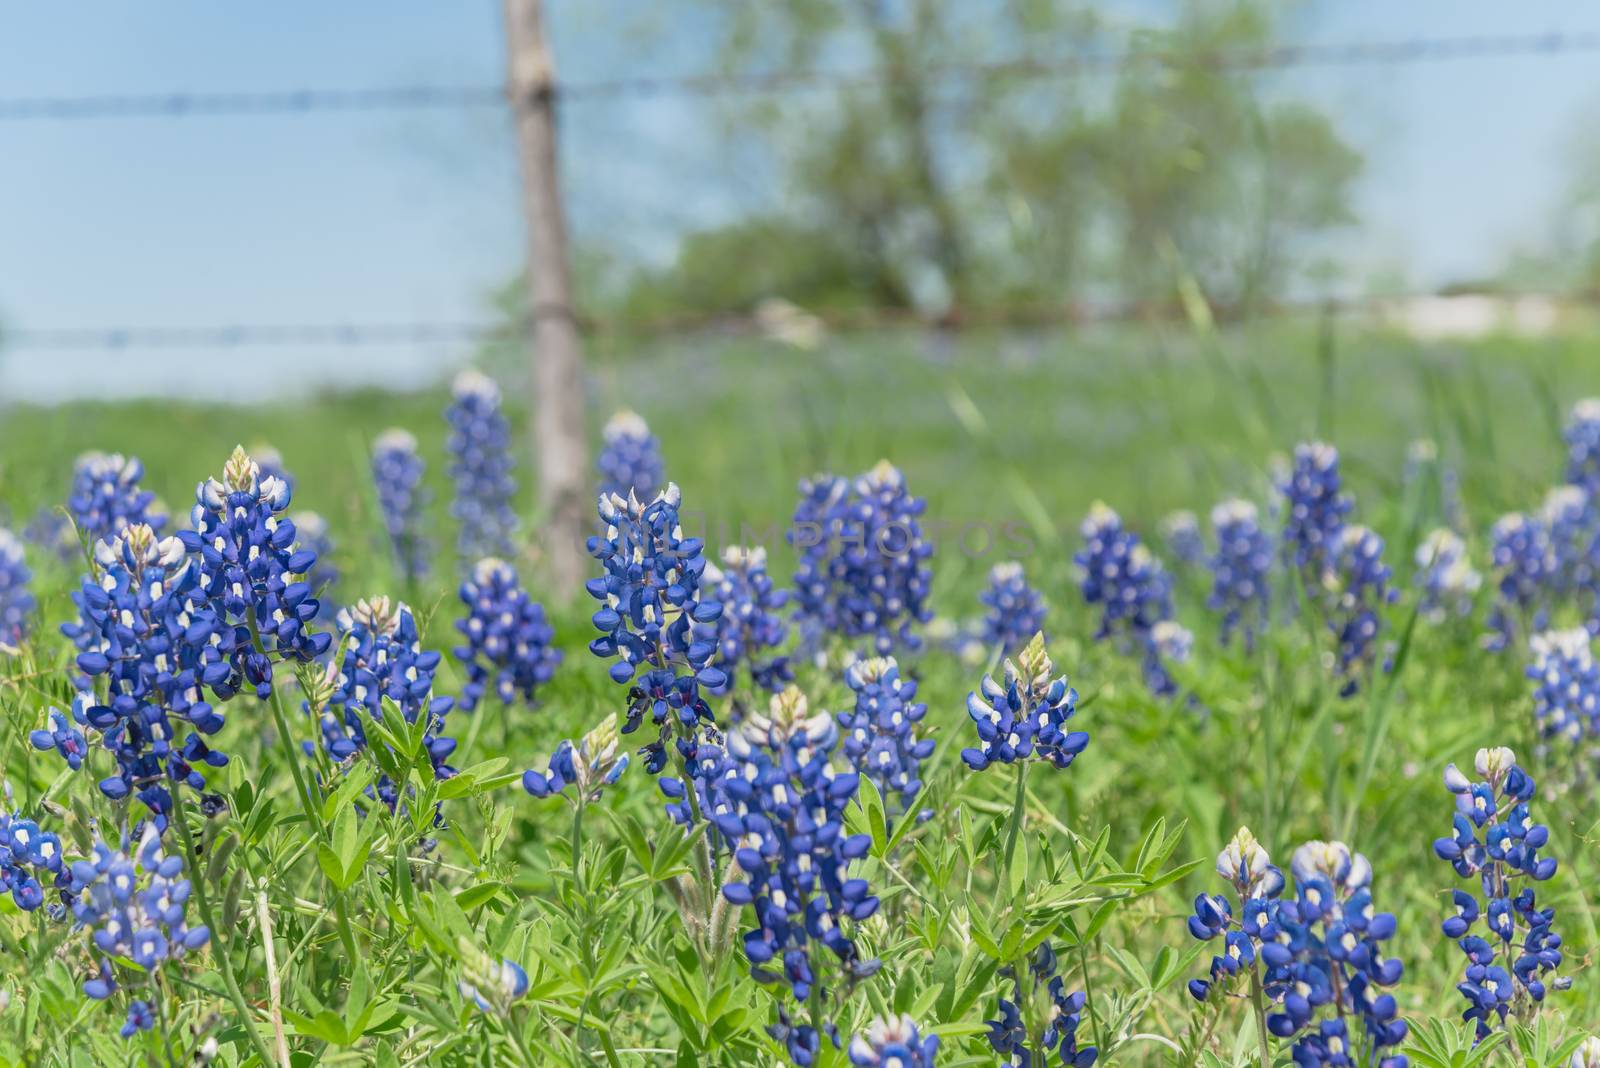 Bluebonnet wildflower blooming near local farm with barbed wire  by trongnguyen